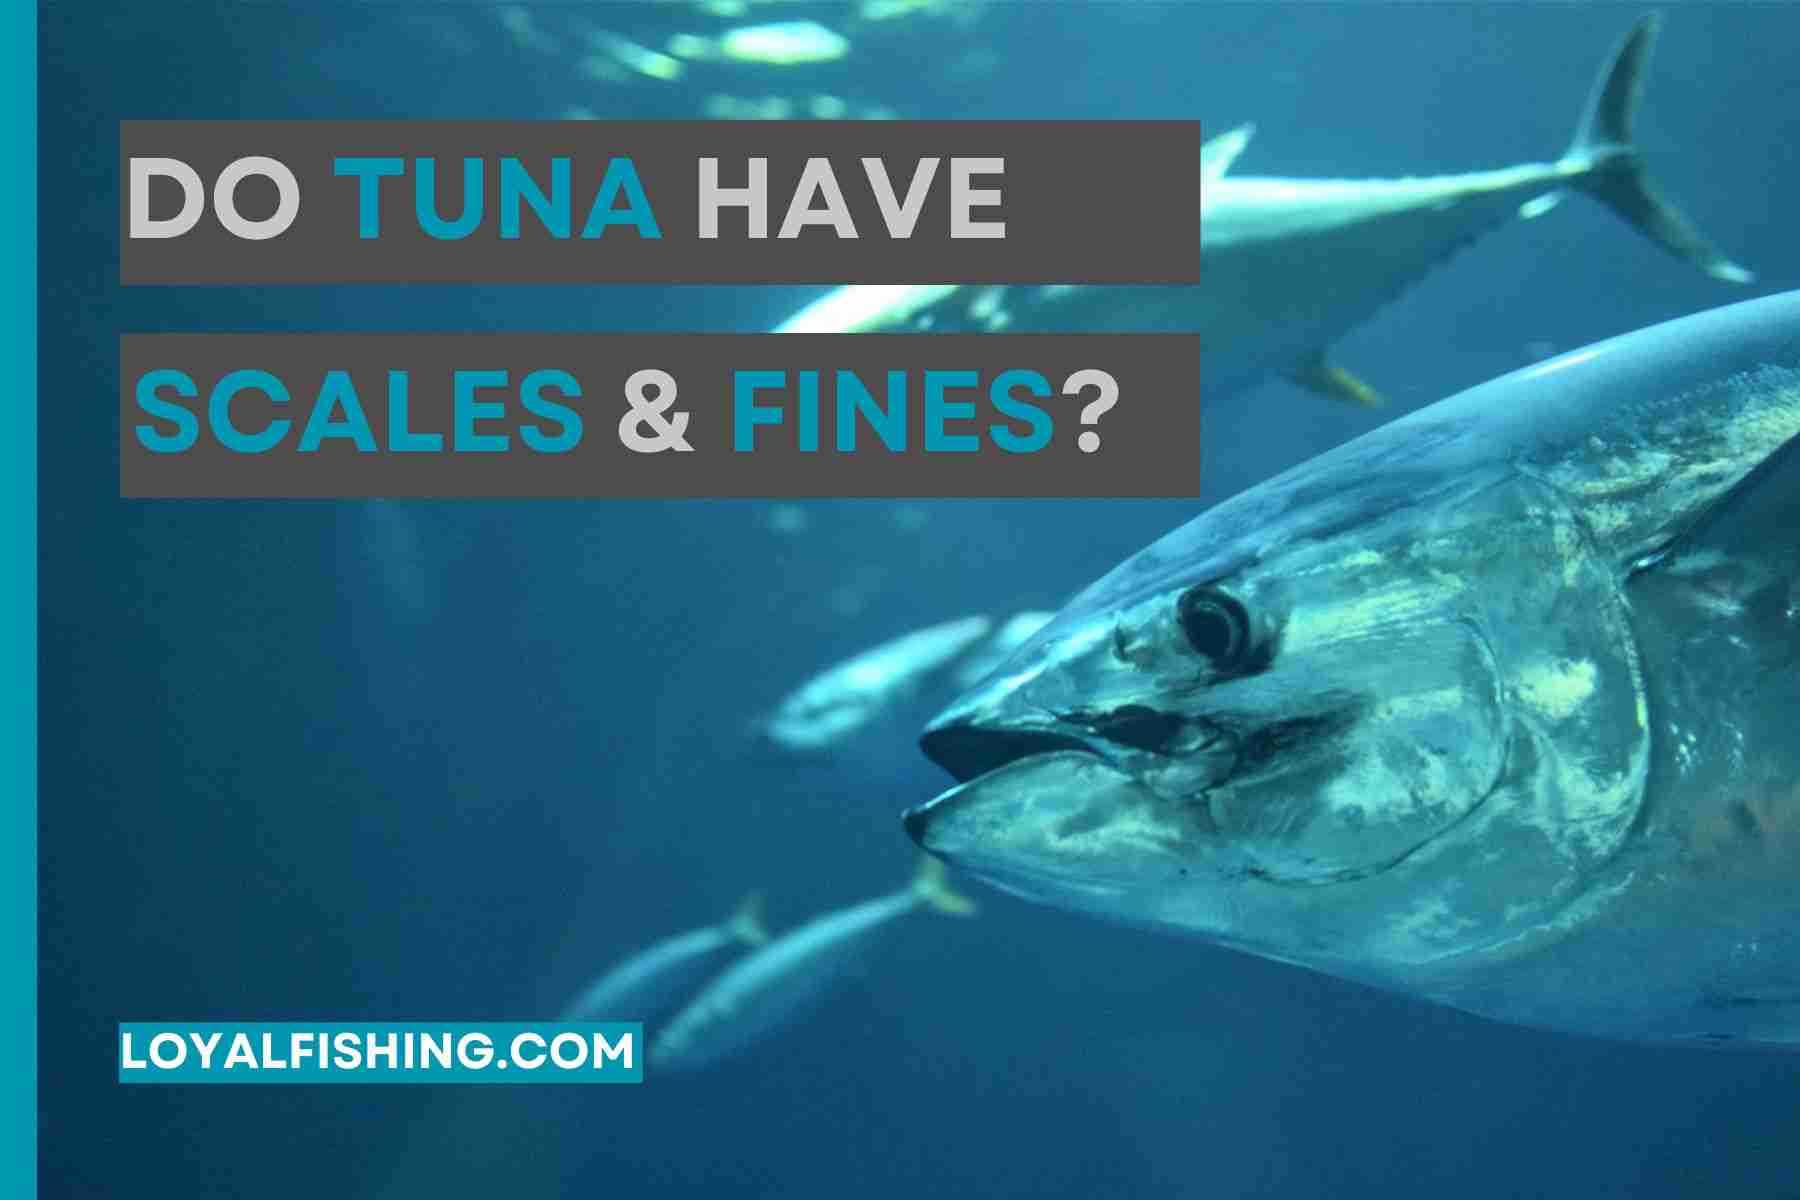 Do tuna have Scales and Fines